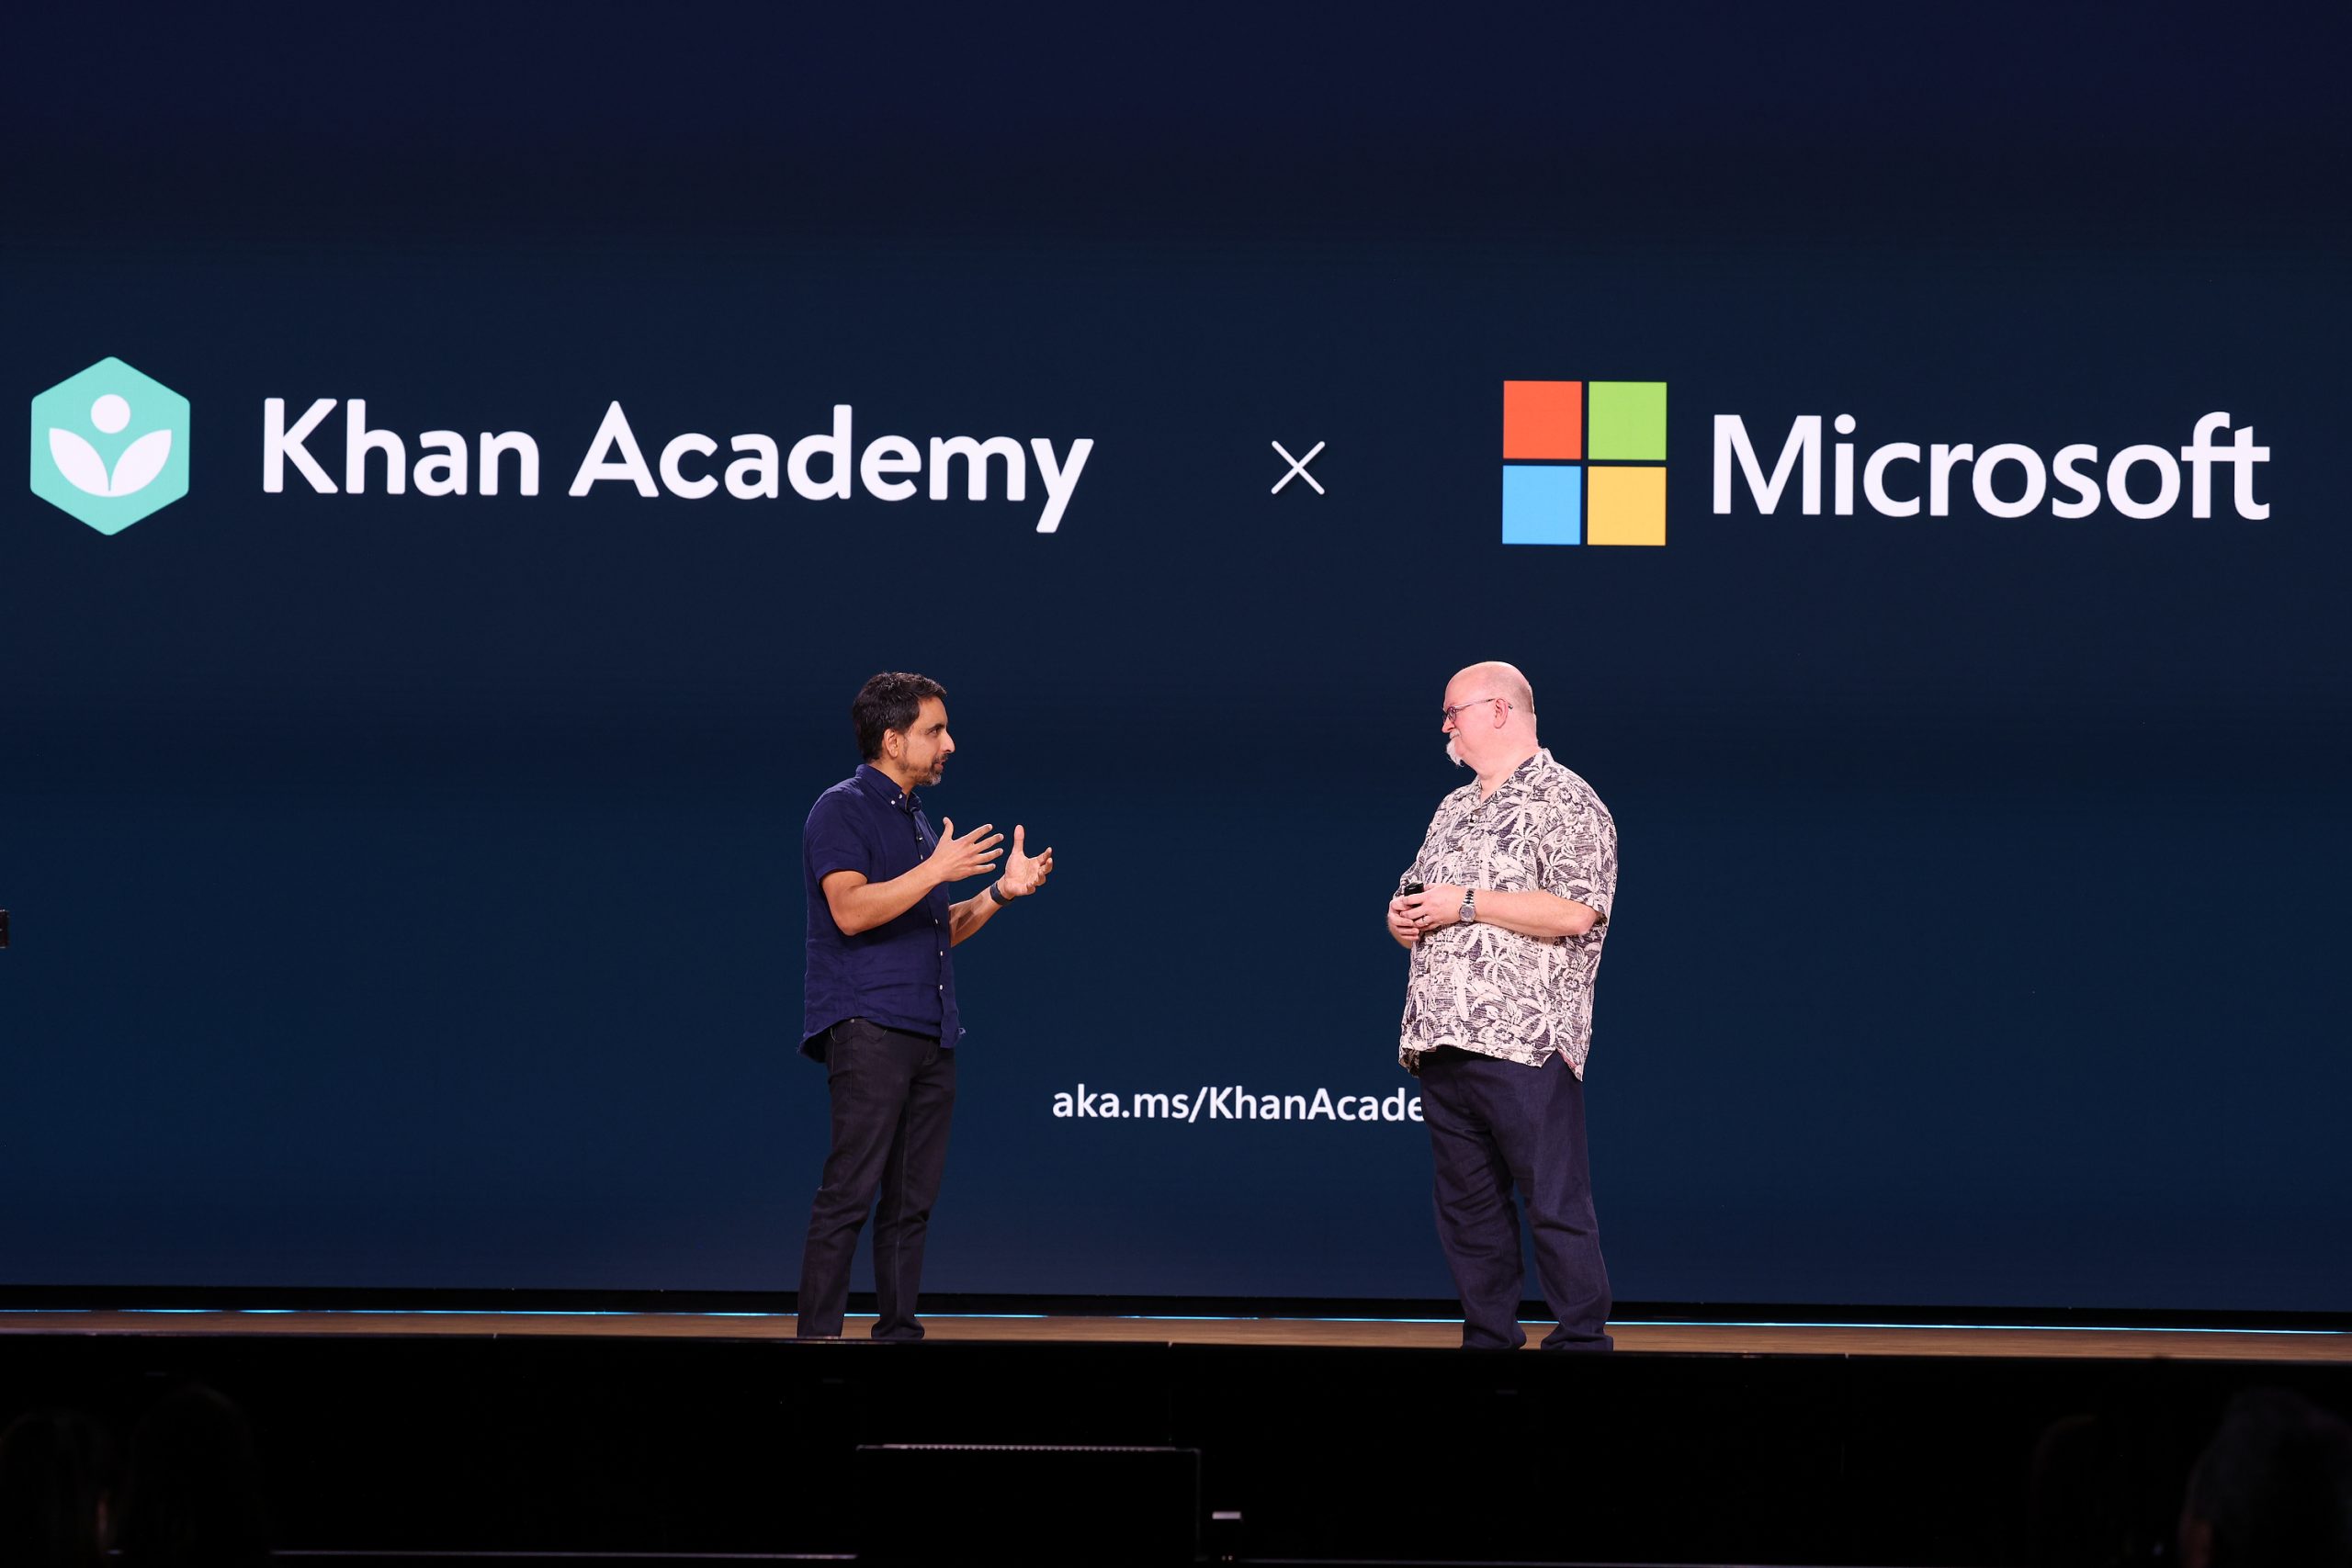 Two men standing on stage with Khan Academy and Microsoft logos on a screen behind them